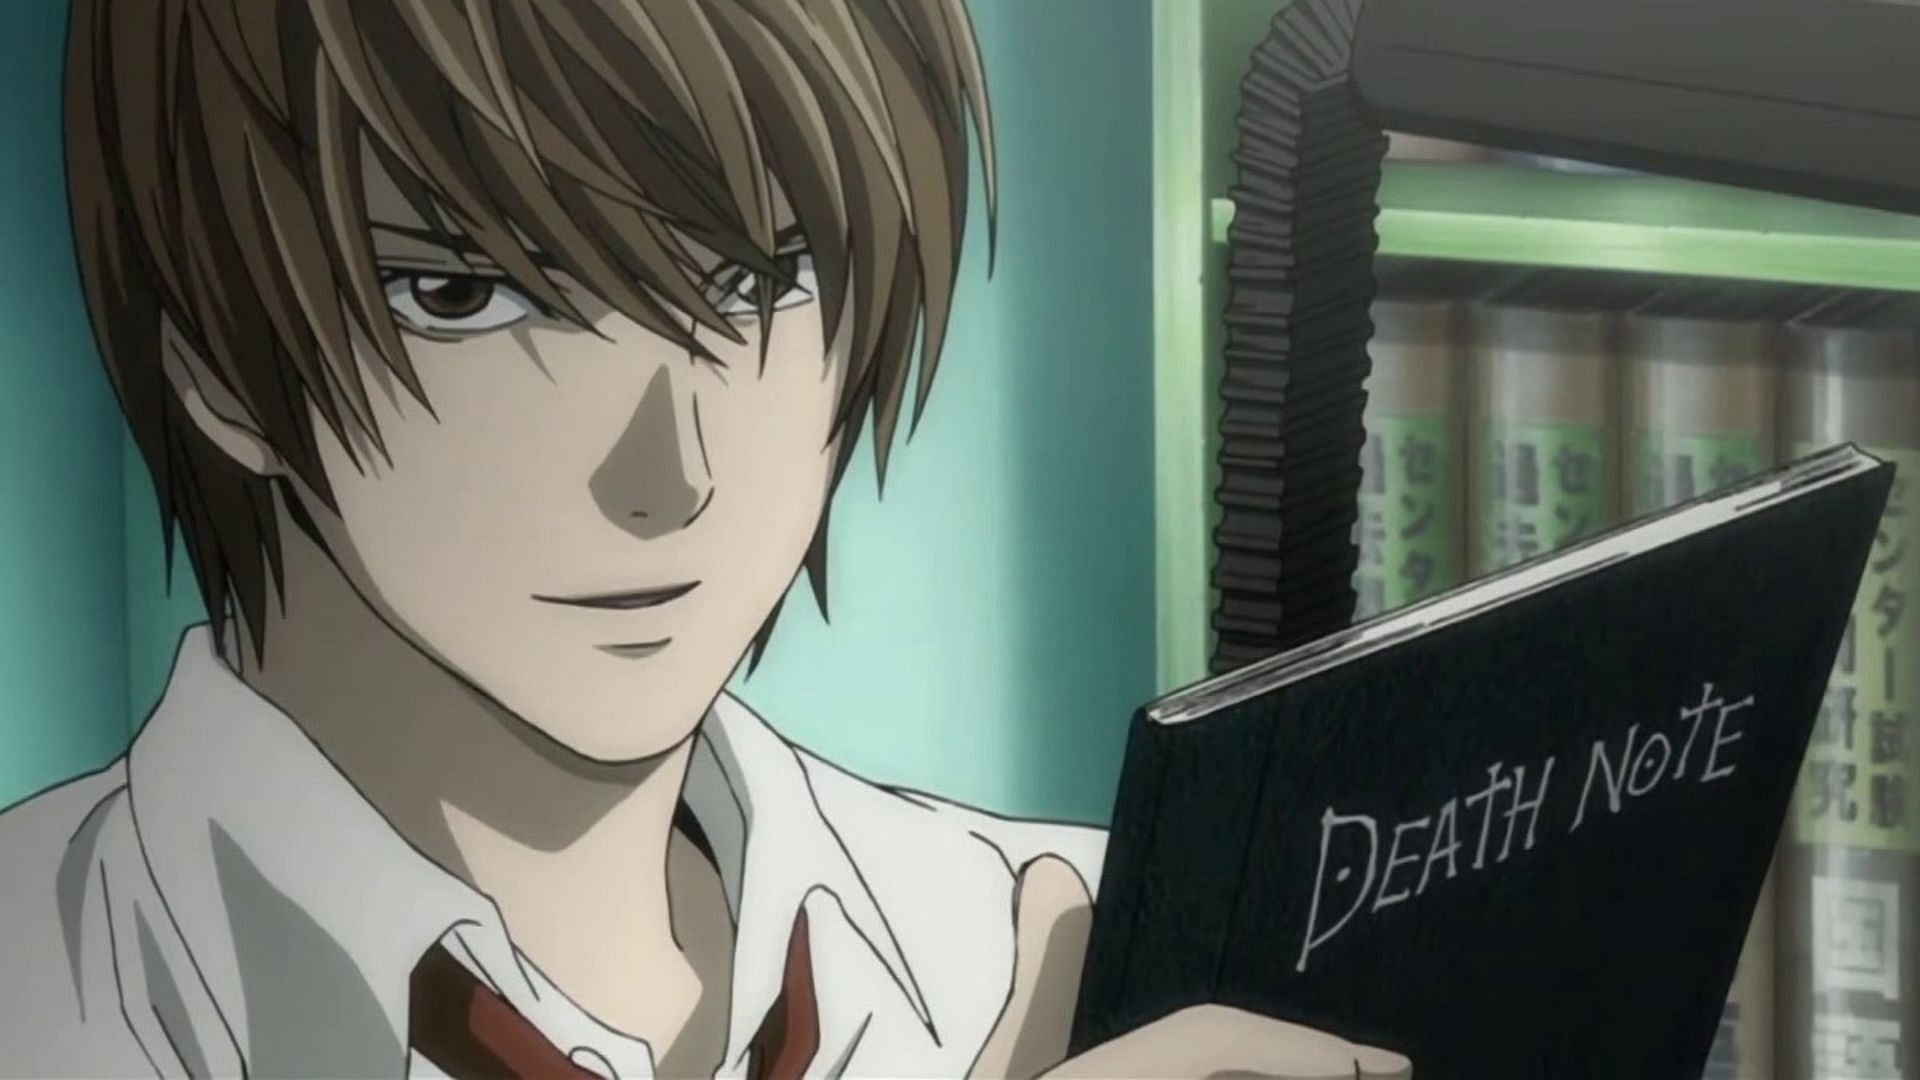 Light Yagami as seen in Death Note (Image via Madhouse)